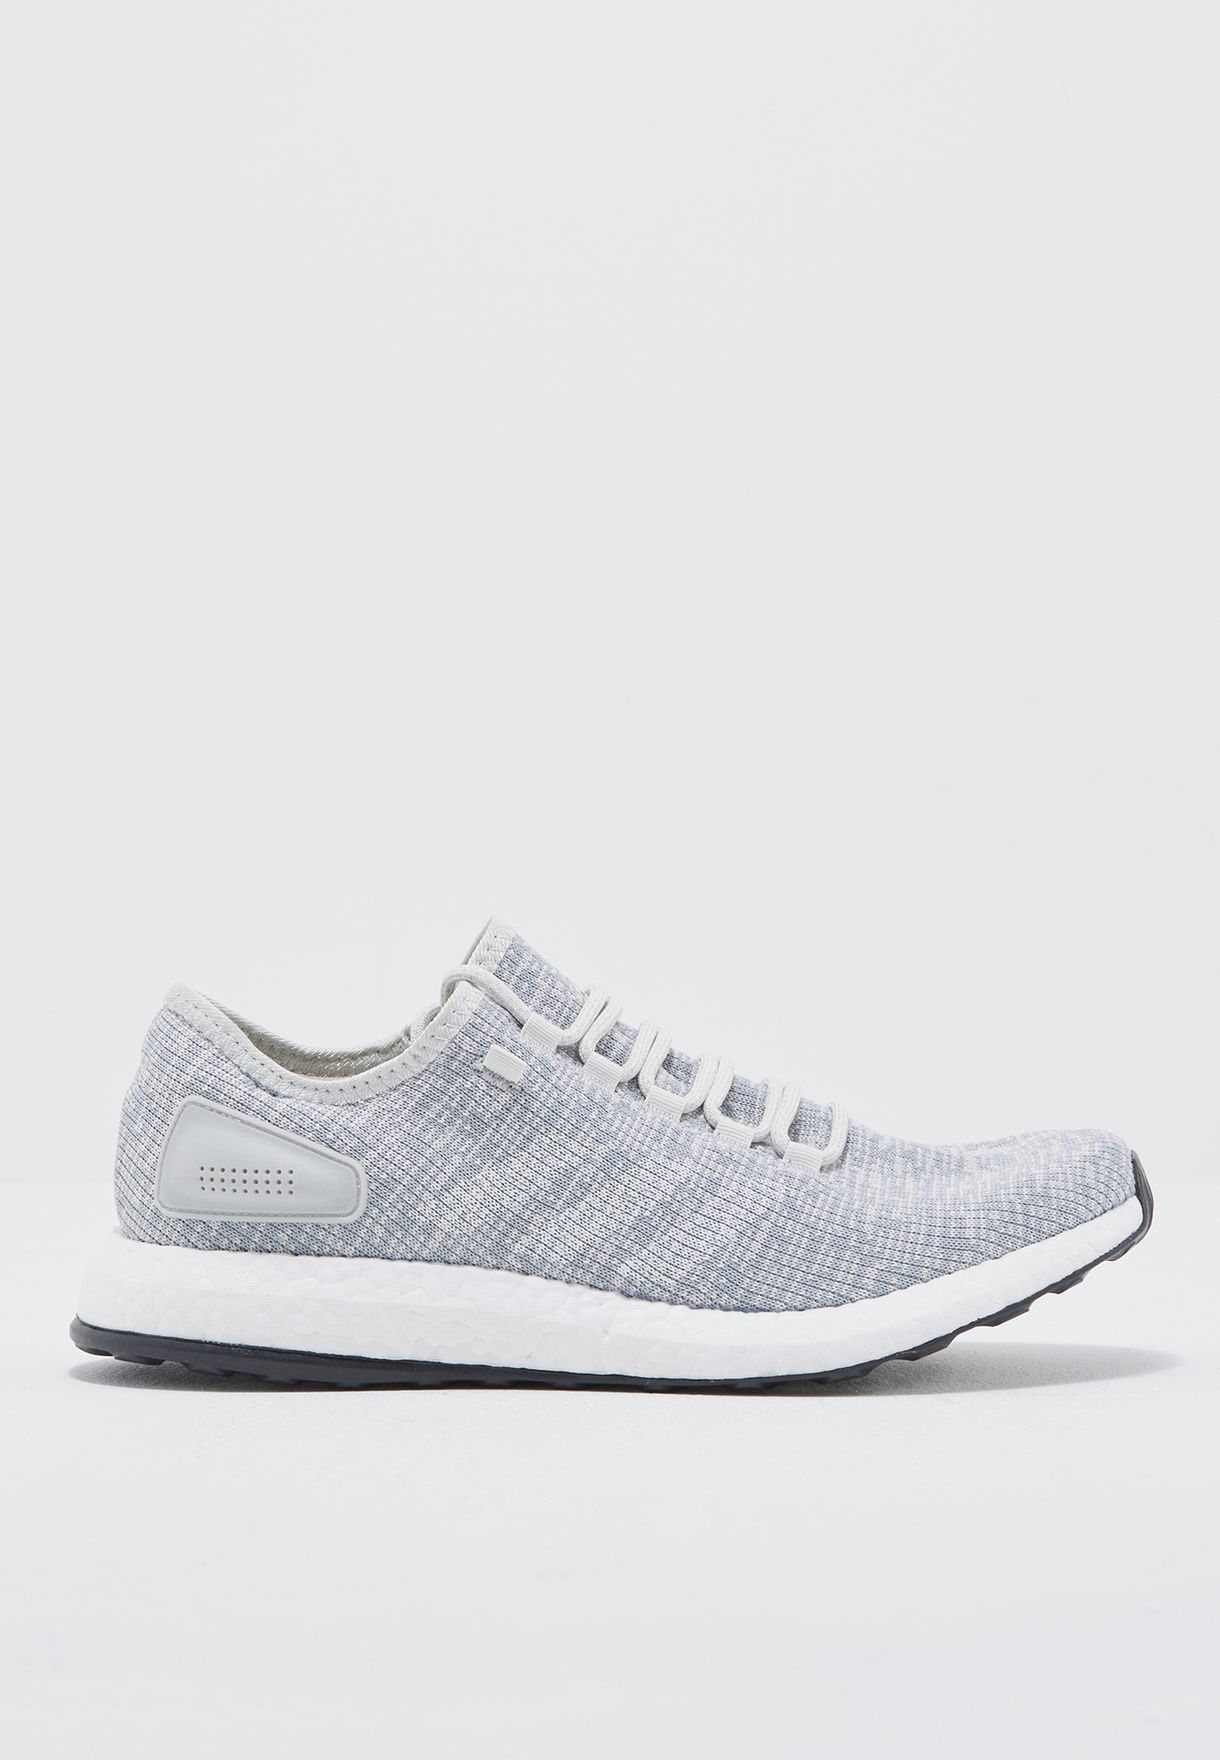 adidas pure boost s81996